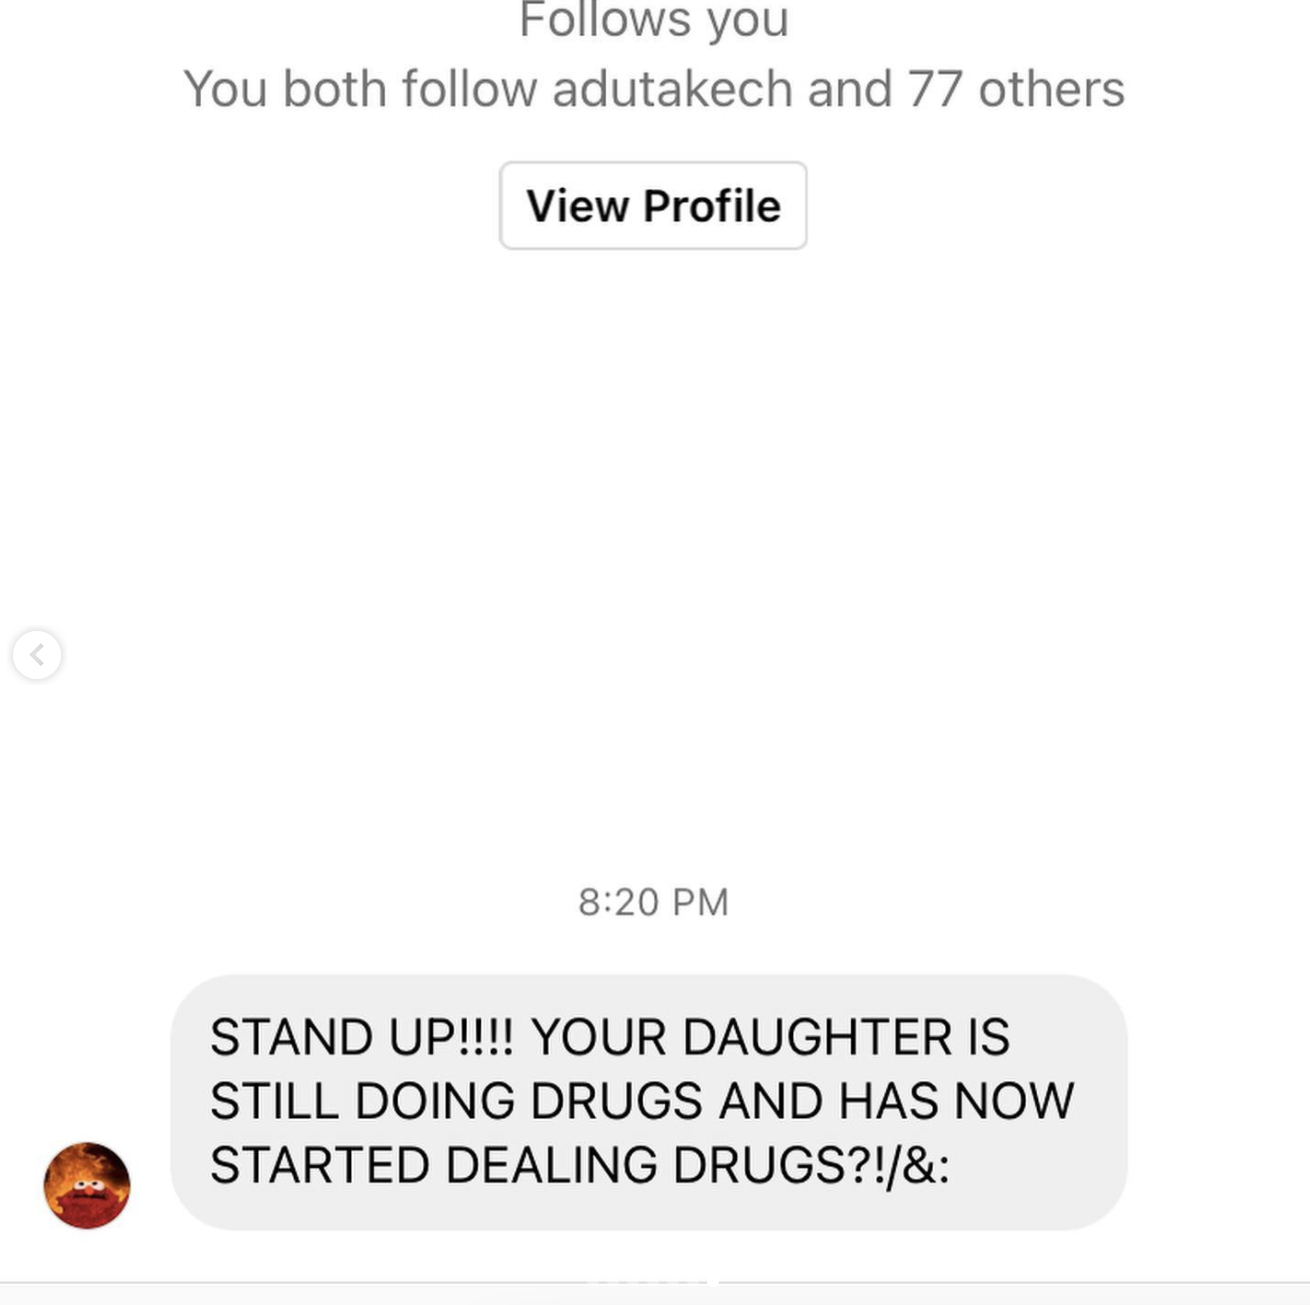 Stand up!! Your daughter is still doing drugs and has now started dealing drugs